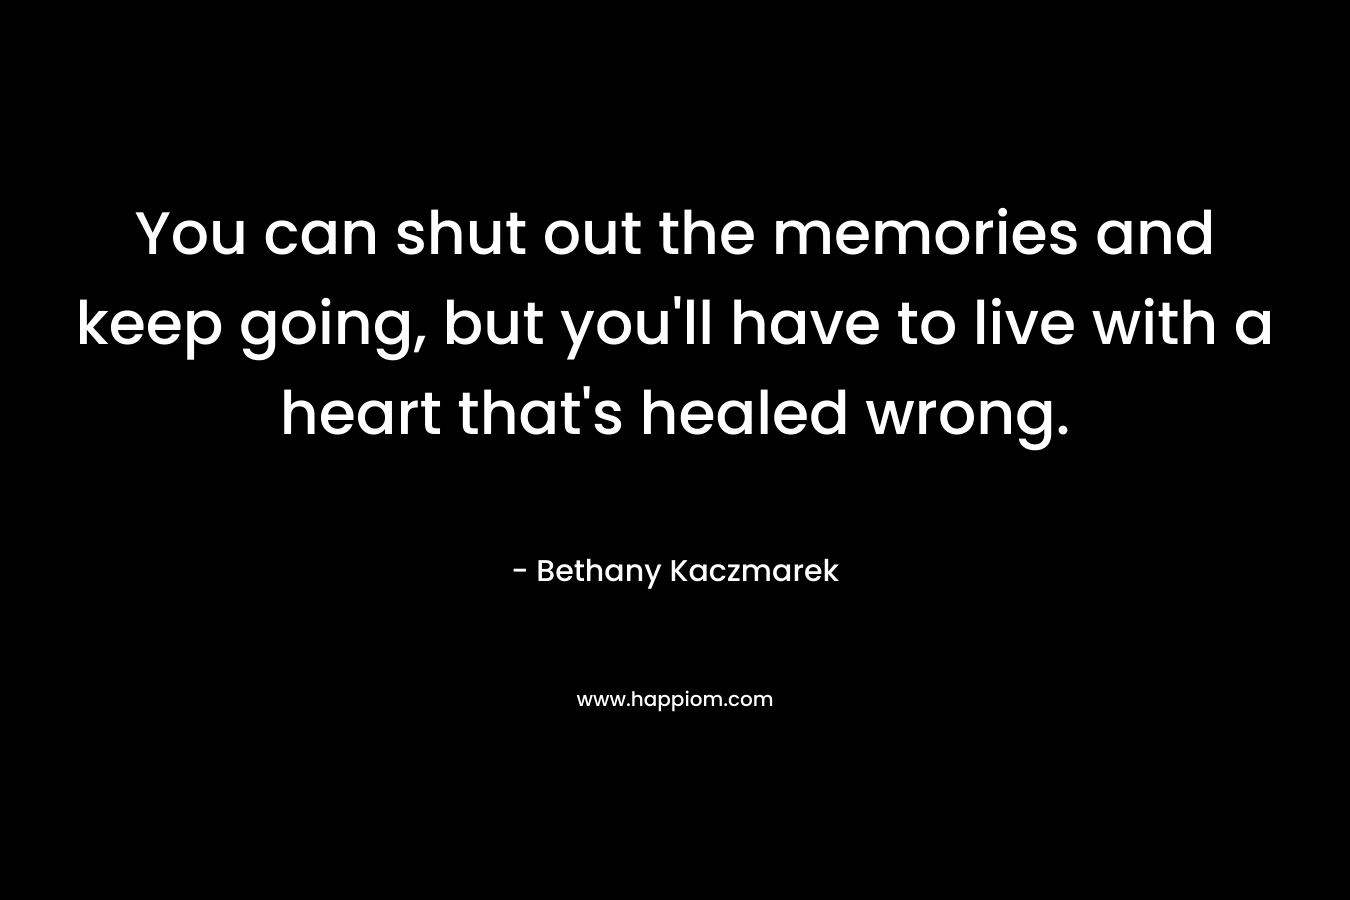 You can shut out the memories and keep going, but you’ll have to live with a heart that’s healed wrong. – Bethany Kaczmarek